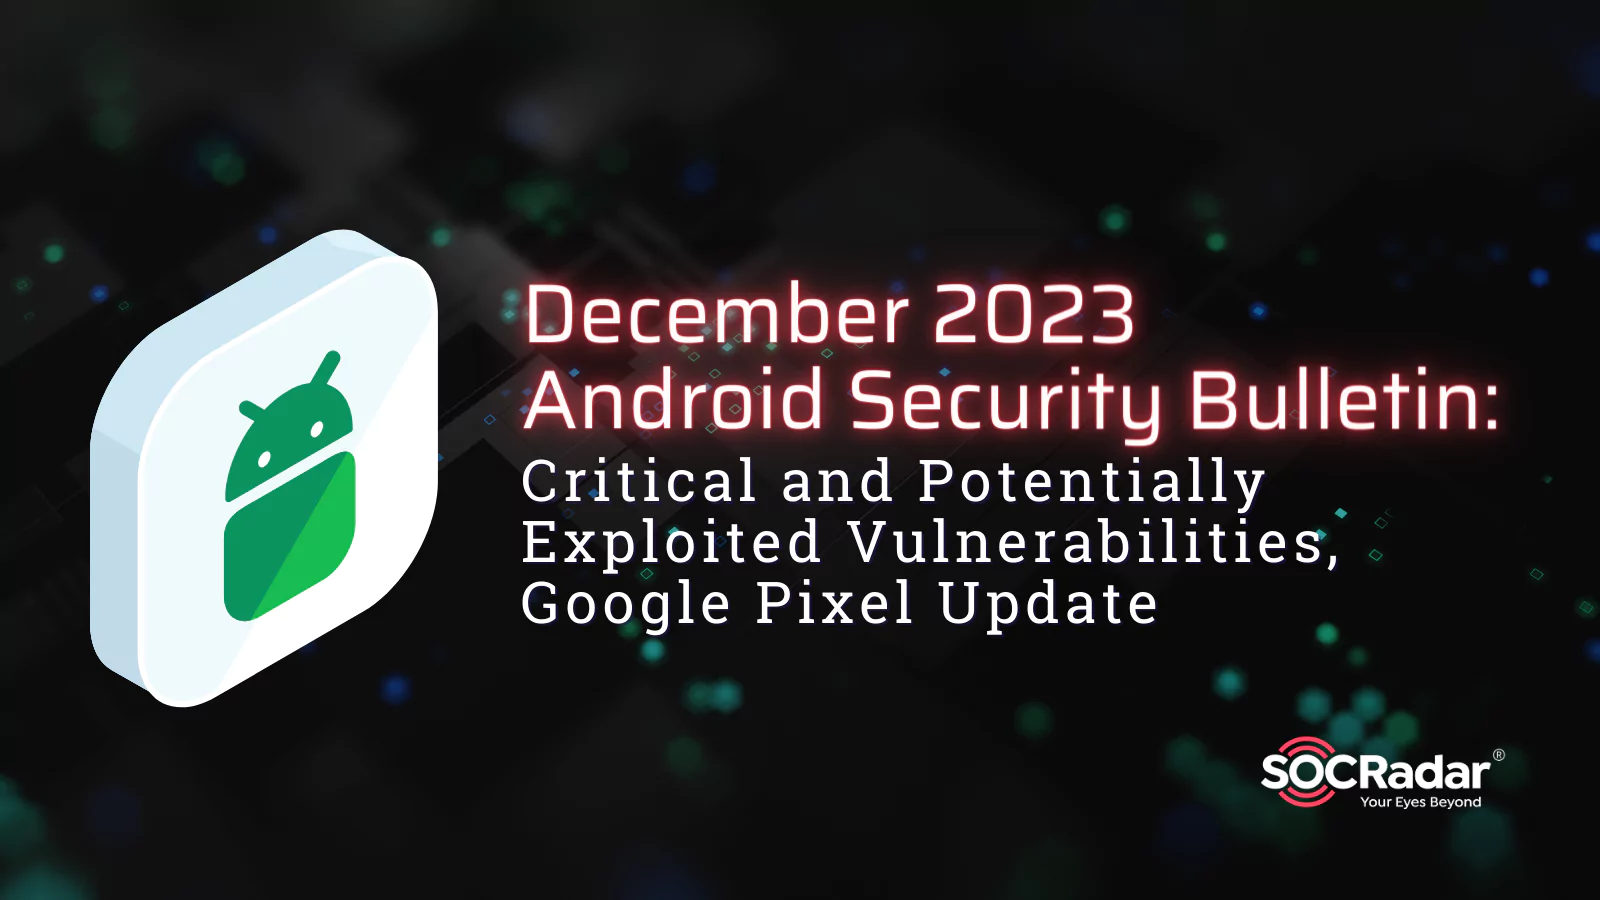 SOCRadar® Cyber Intelligence Inc. | December 2023 Android Security Bulletin: Critical and Potentially Exploited Vulnerabilities, Google Pixel Update